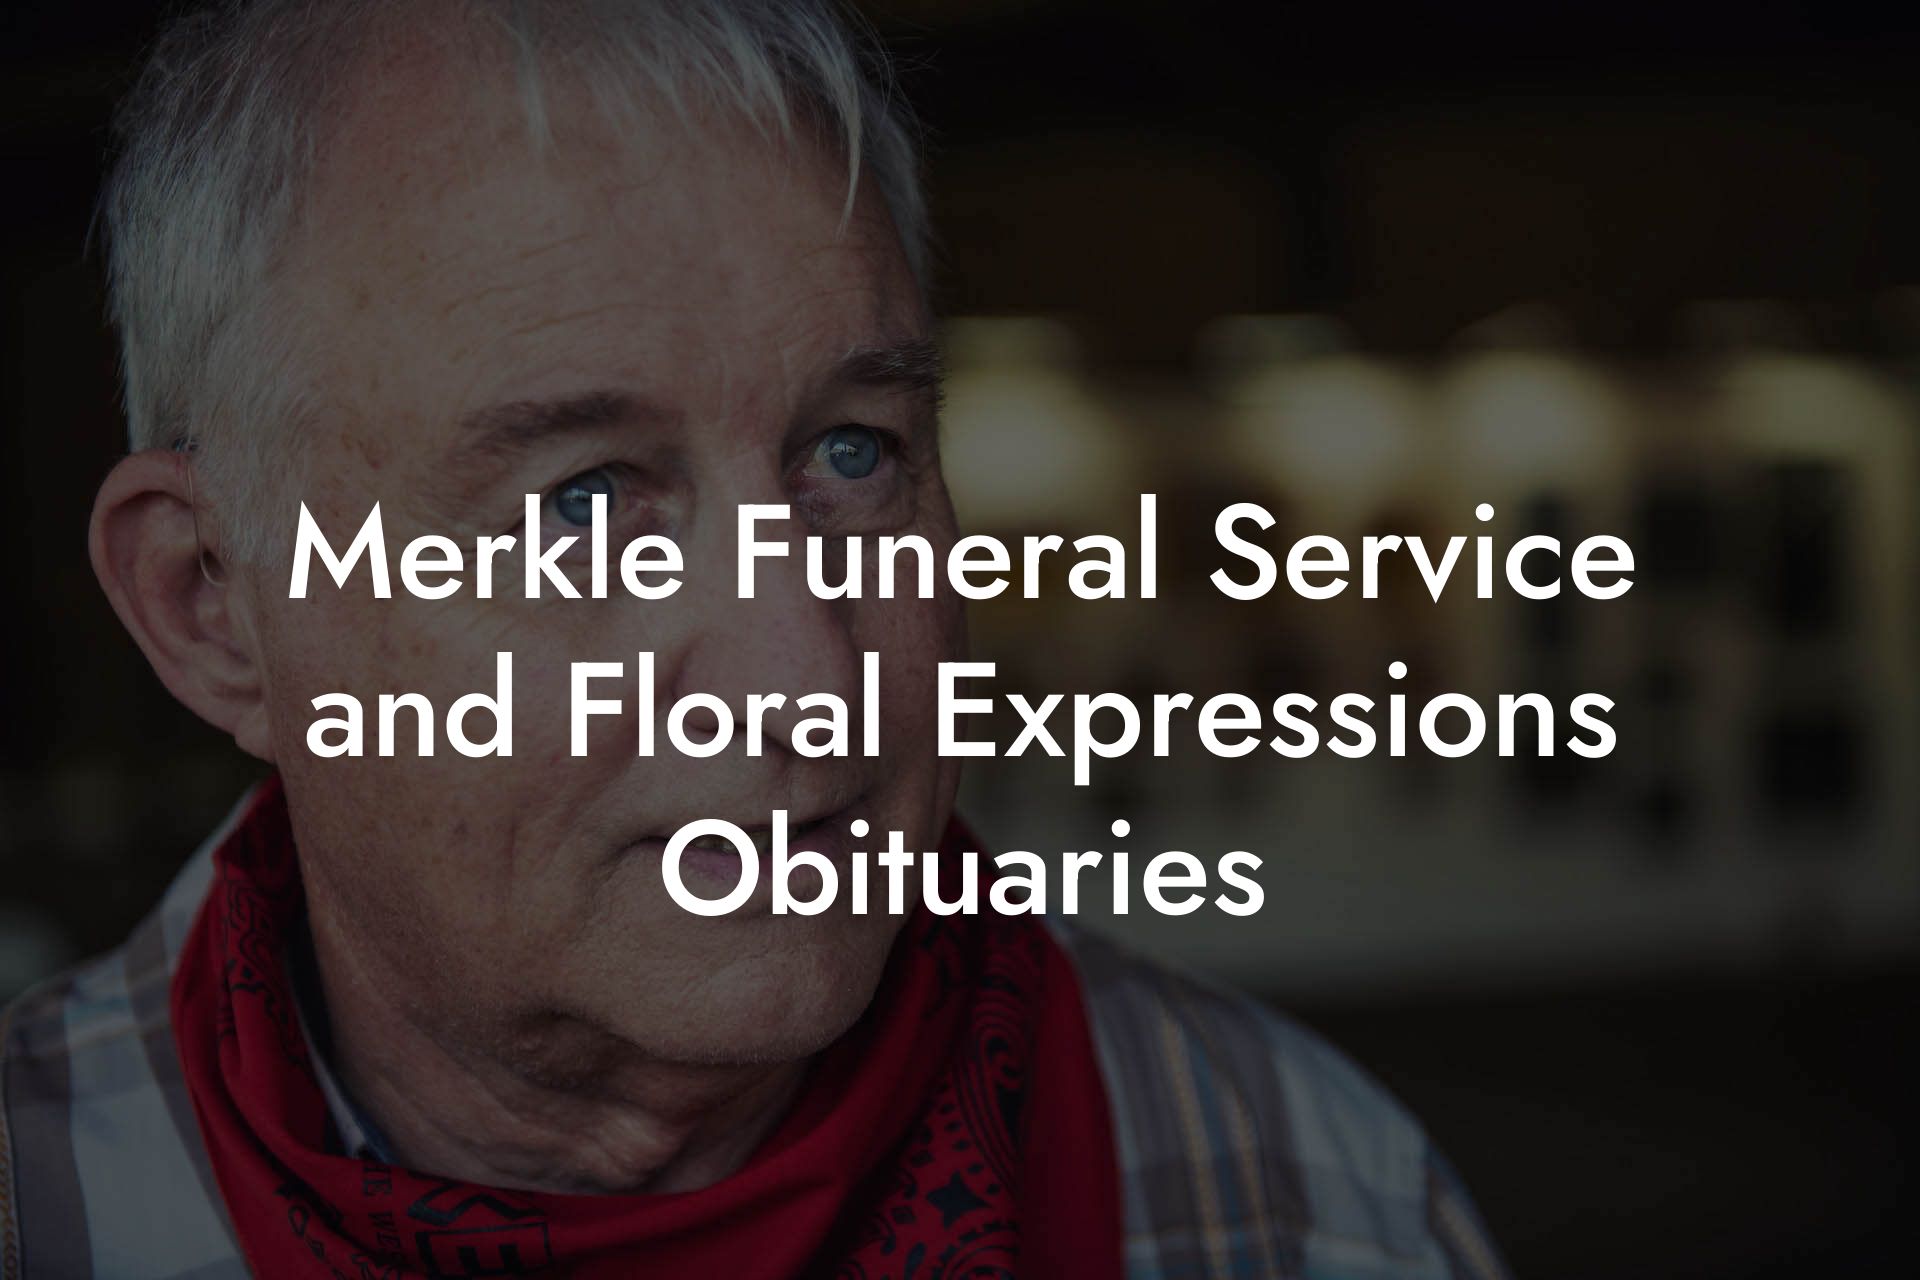 Merkle Funeral Service and Floral Expressions Obituaries